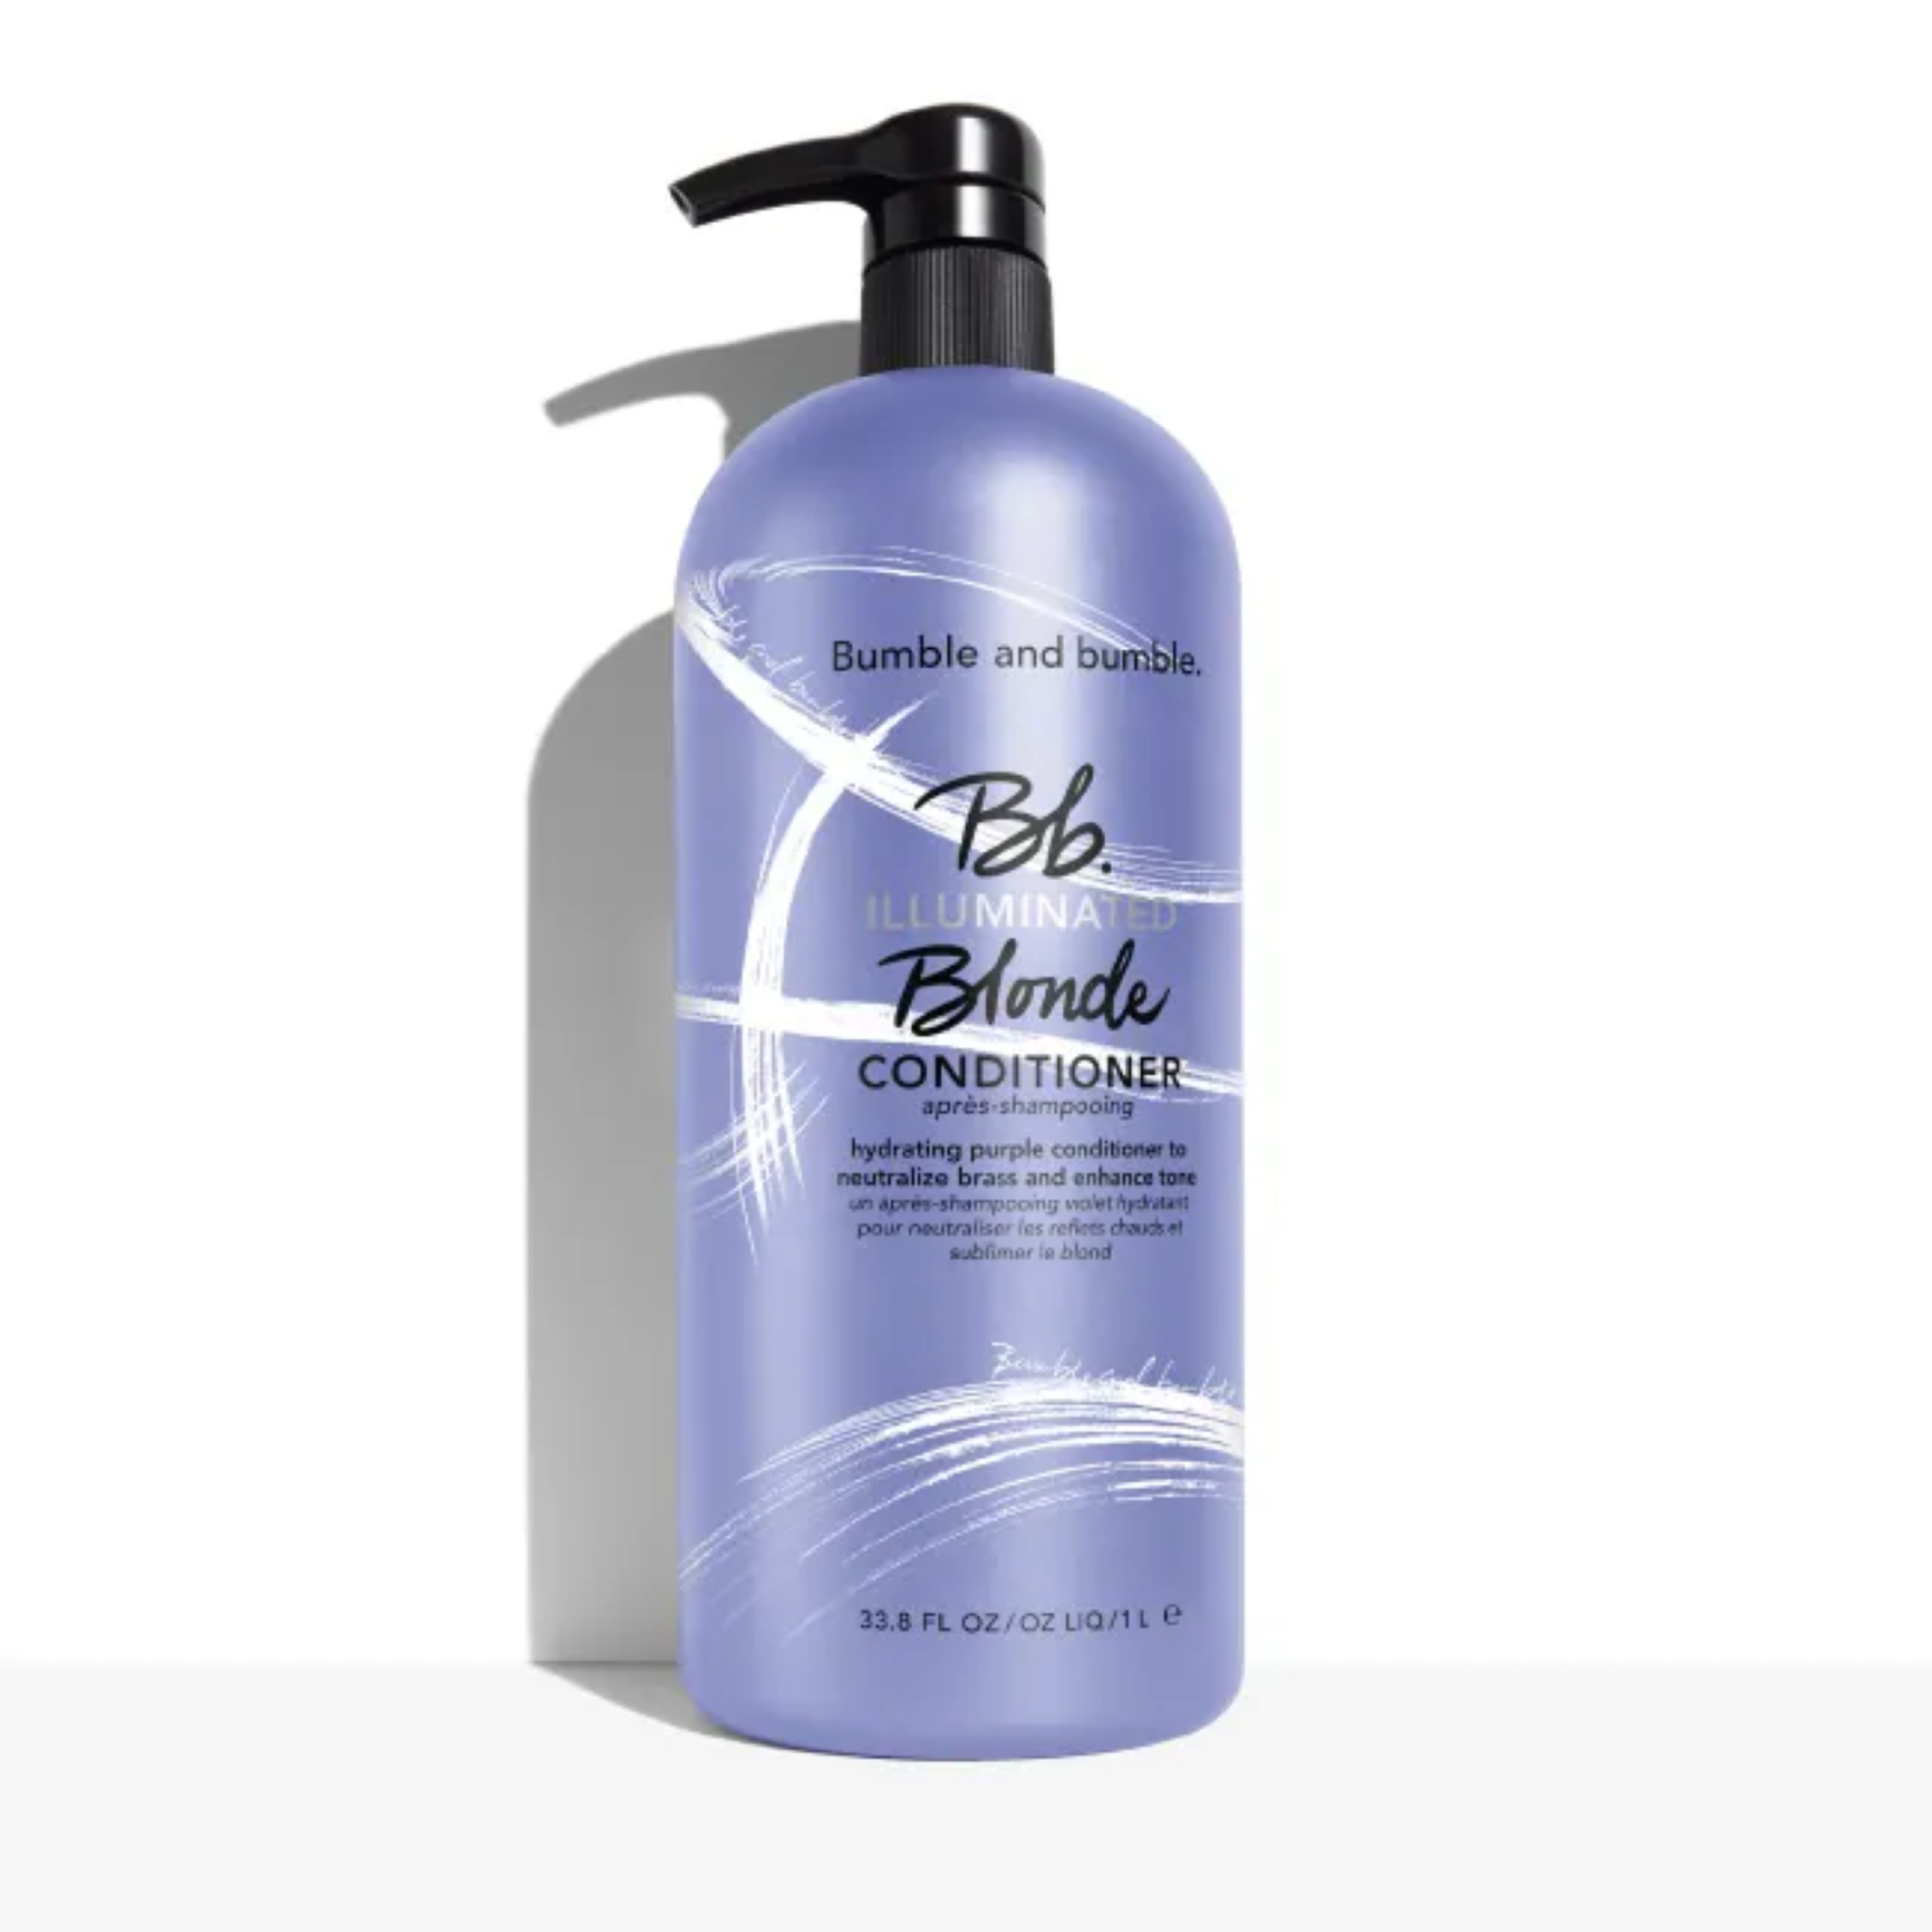 Bumble and bumble Bb.Illuminated Blonde Shampoo and Conditioner Liter Duo ($190 Value) / LITER